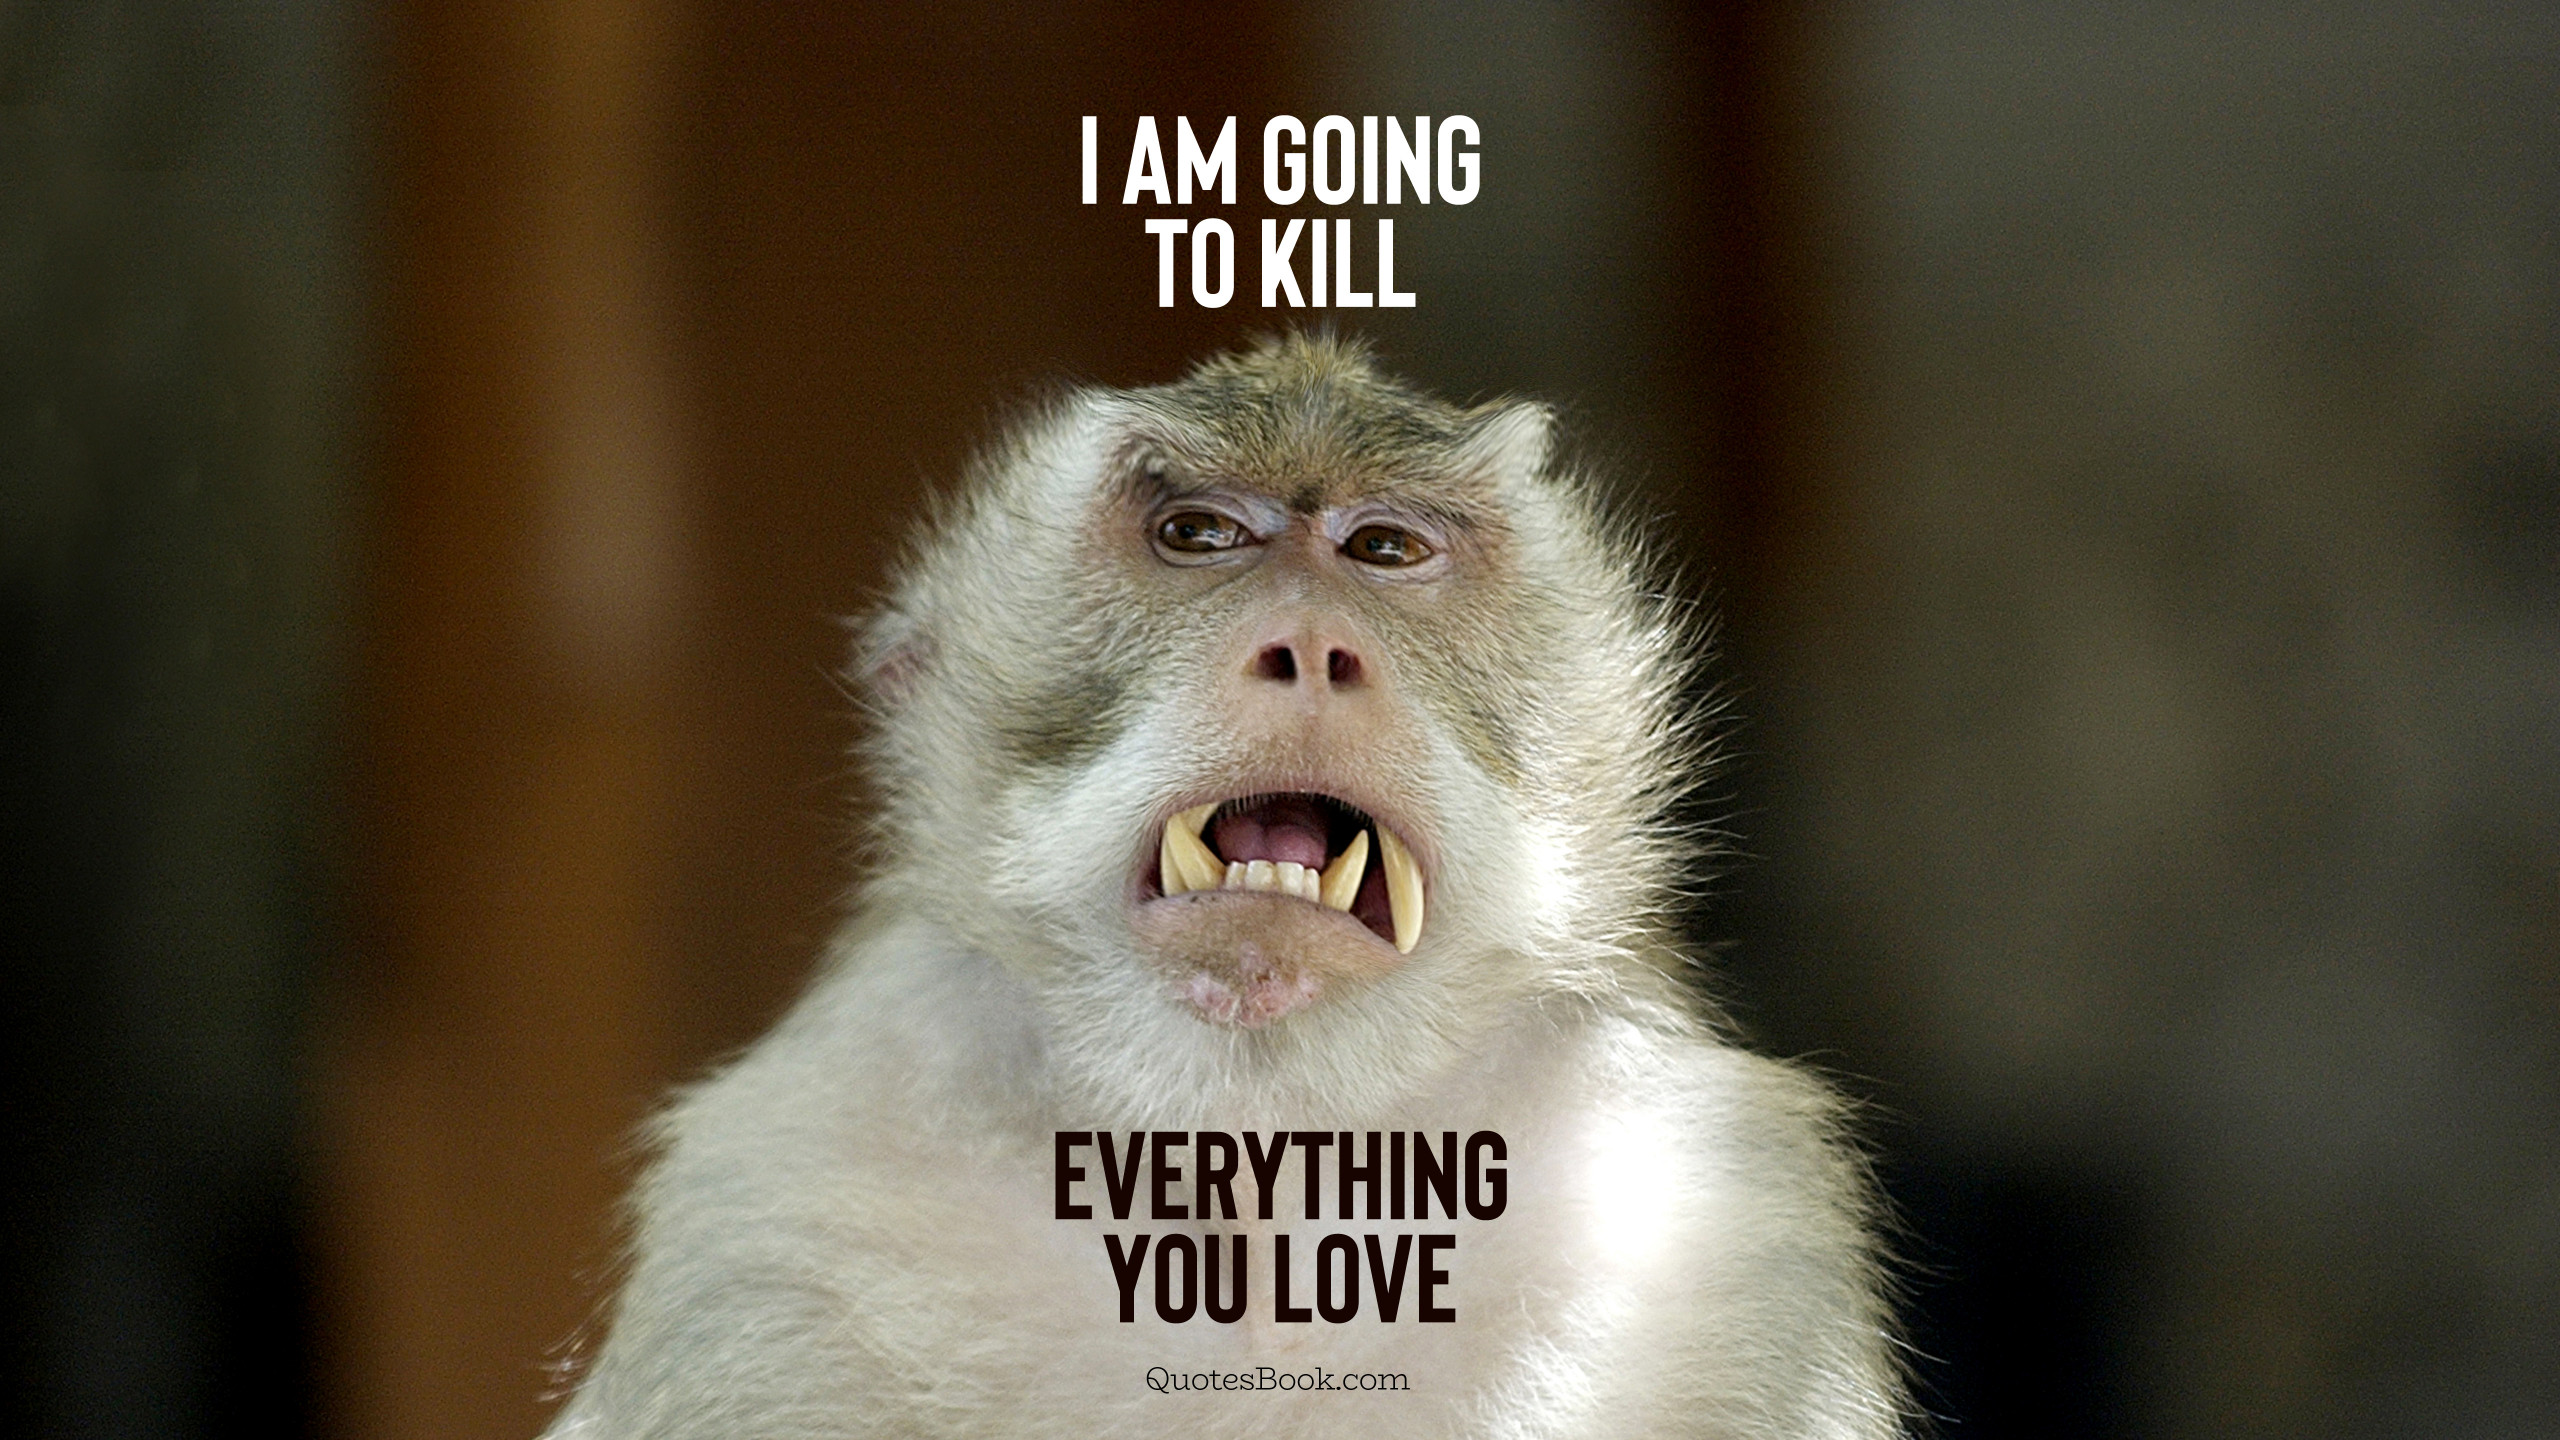 I'm going to kill everything you love QuotesBook